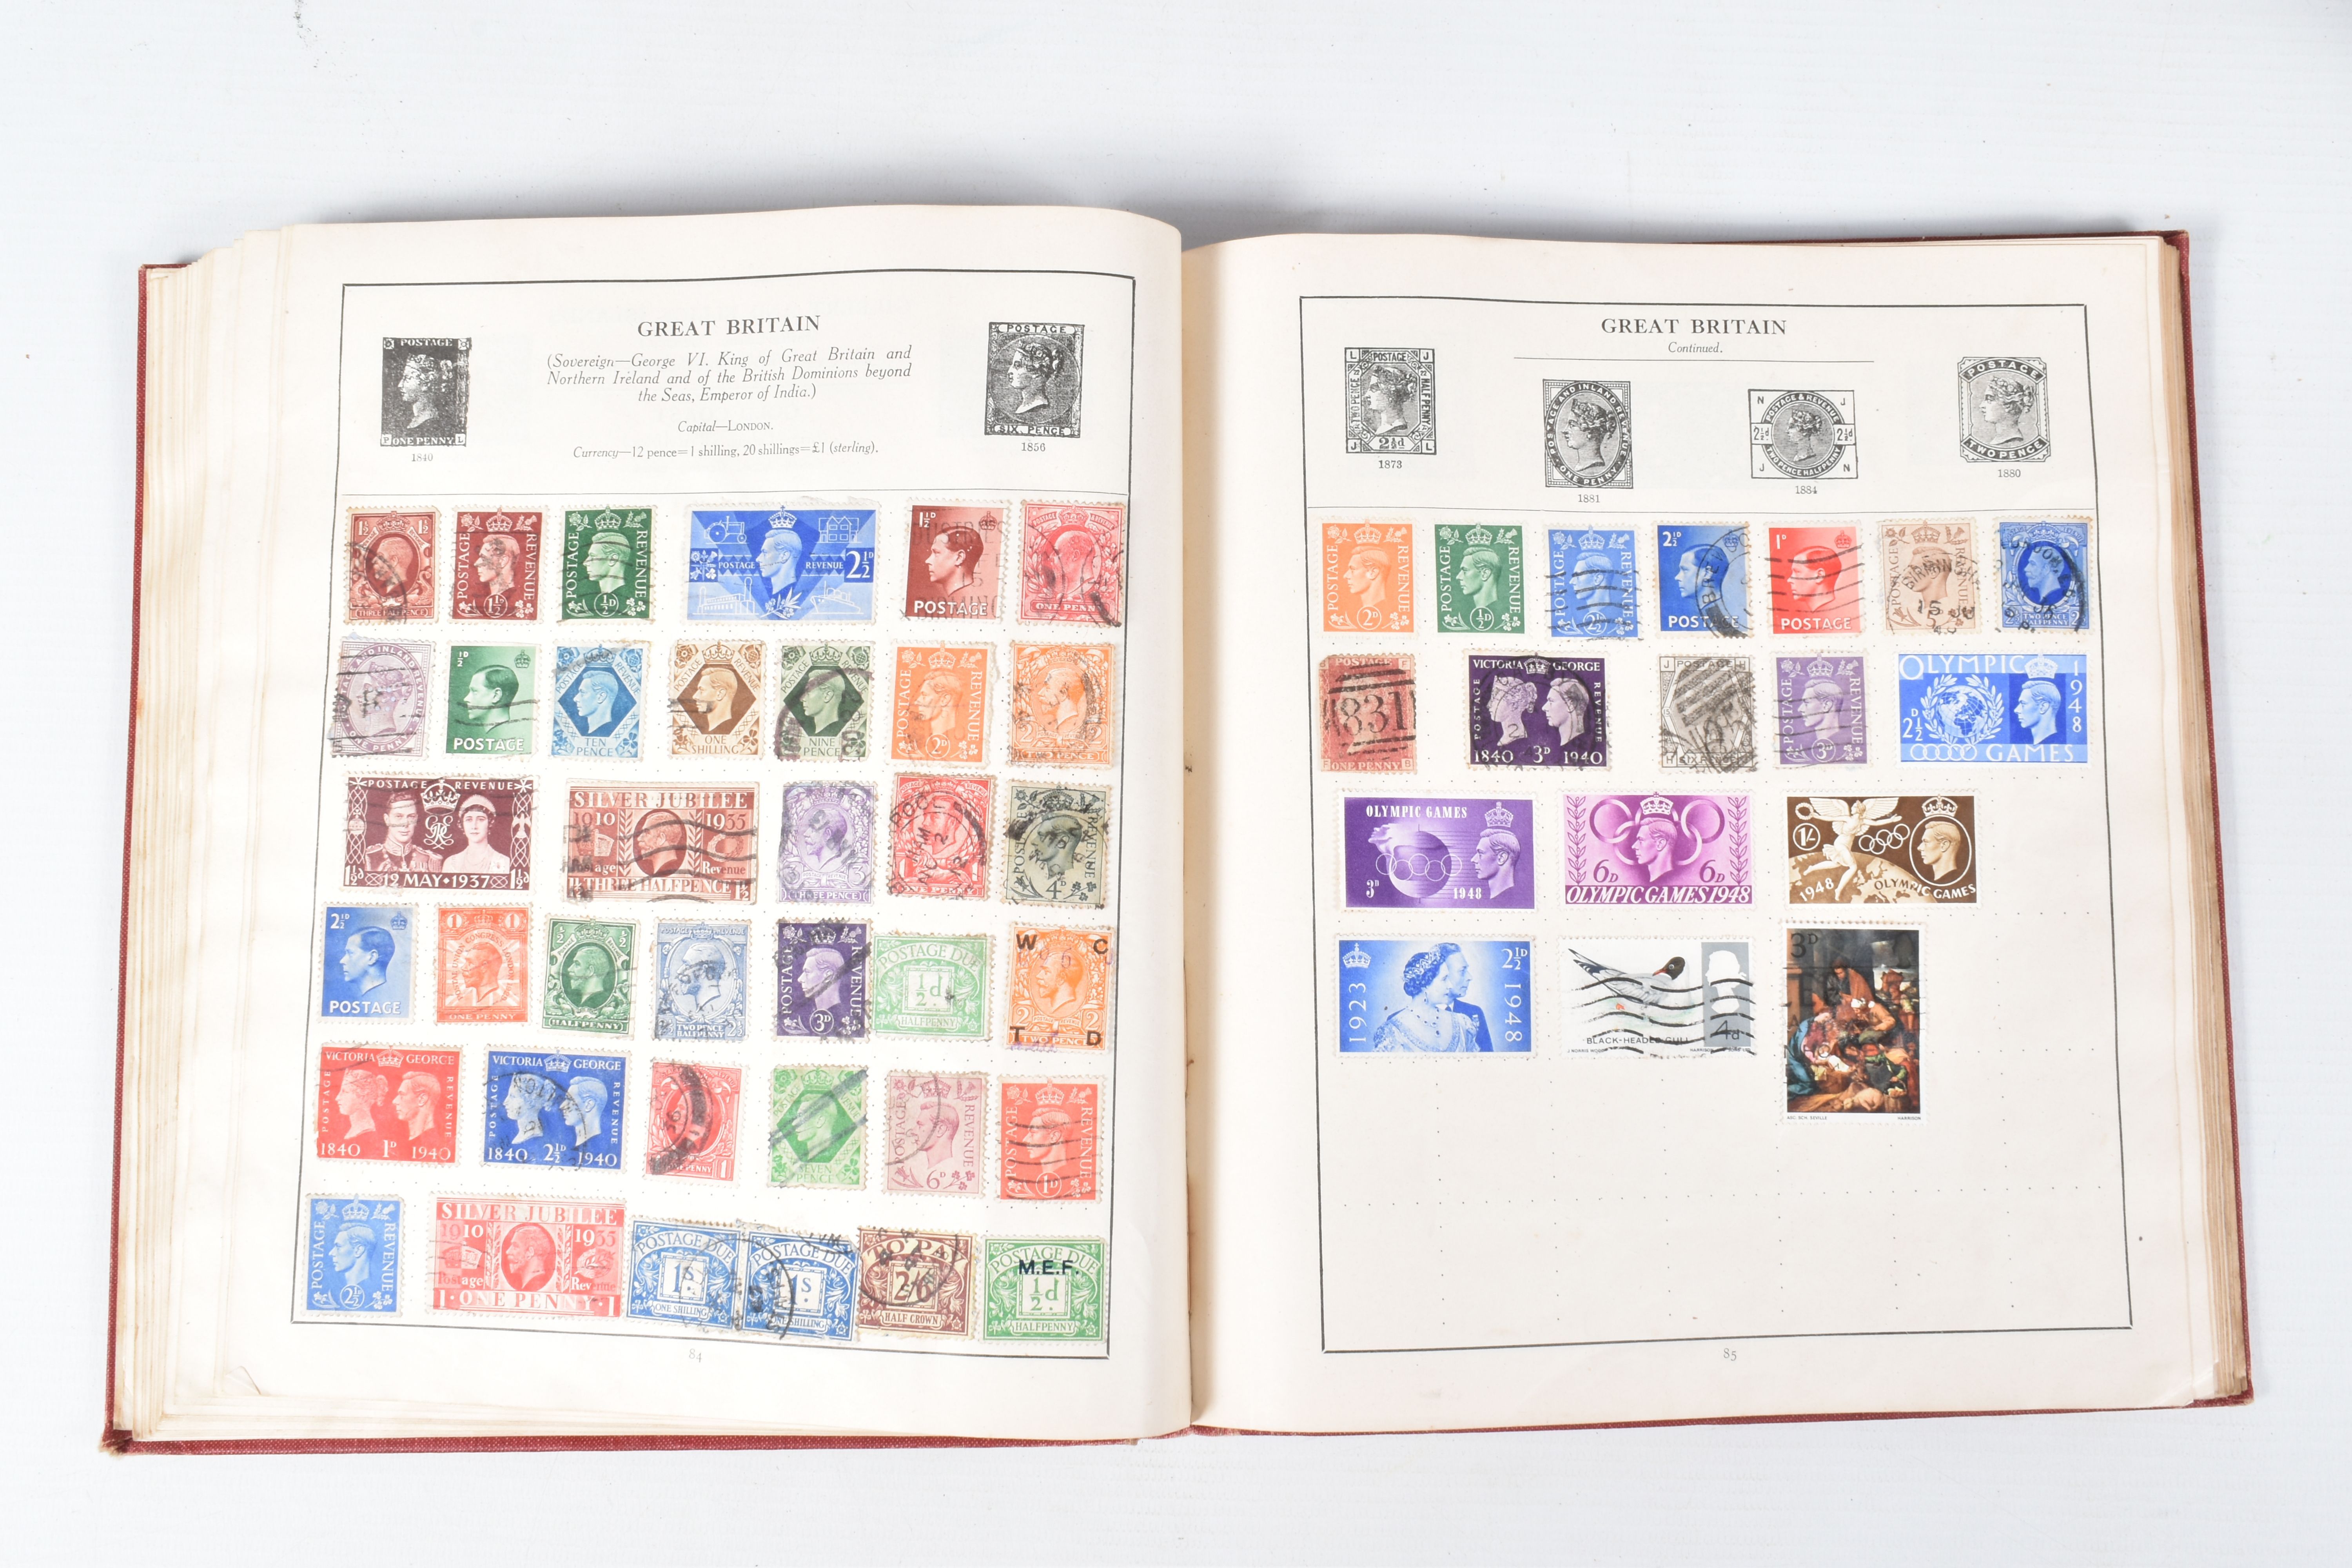 STAMP COLLECTION IN 2 SMALL CASES. We note 2 Strand type albums with multi-generation collectionm - Image 11 of 23